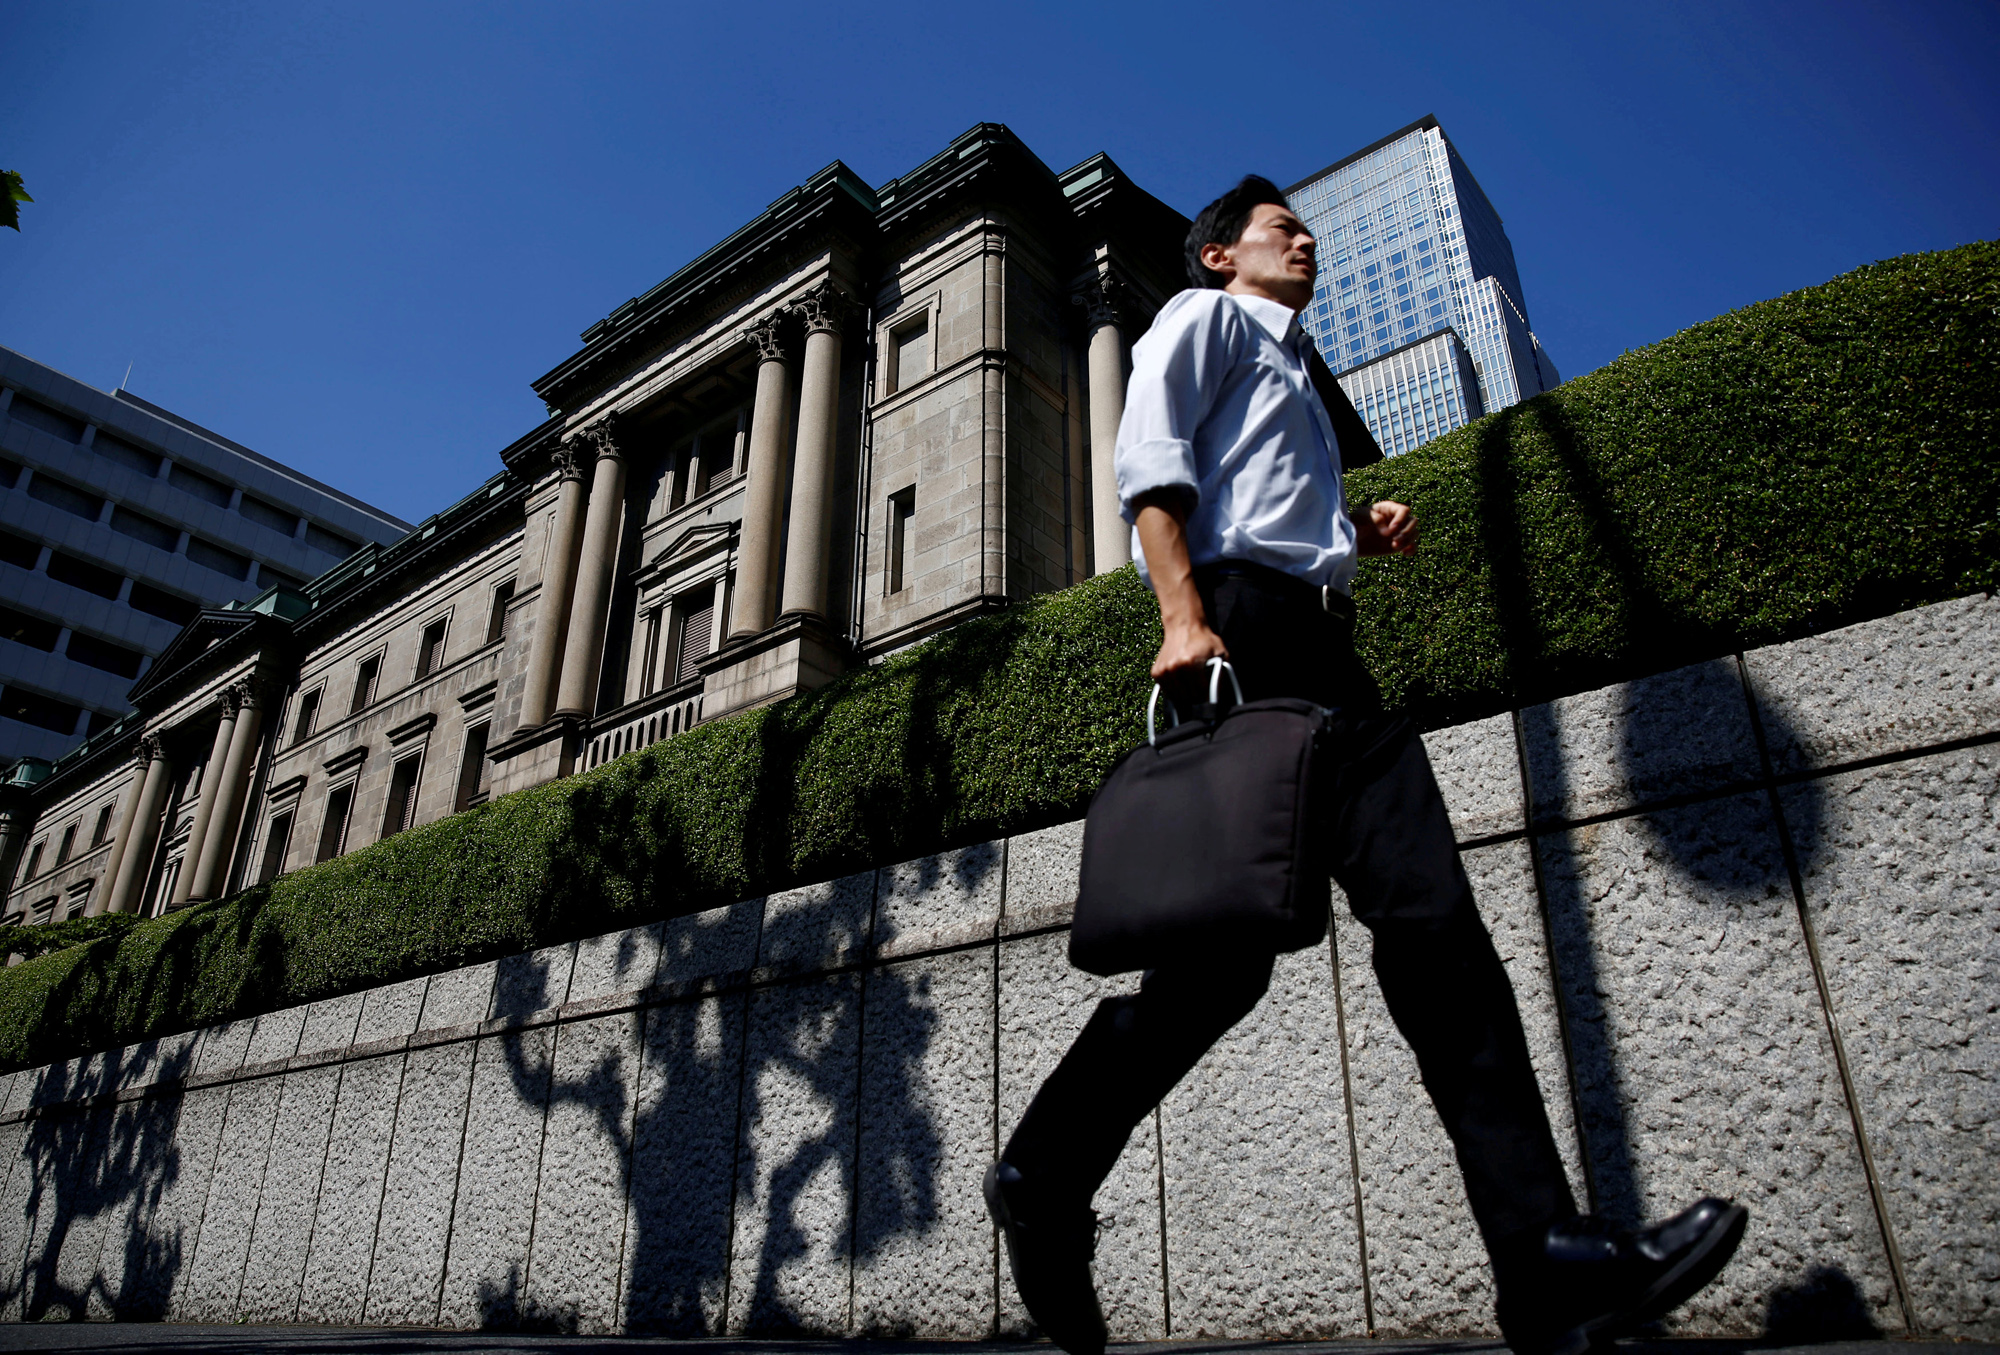 More than five years have passed since the Bank of Japan officially adopted a 2 percent inflation target, but inflation remains around 0.1 percent. | REUTERS